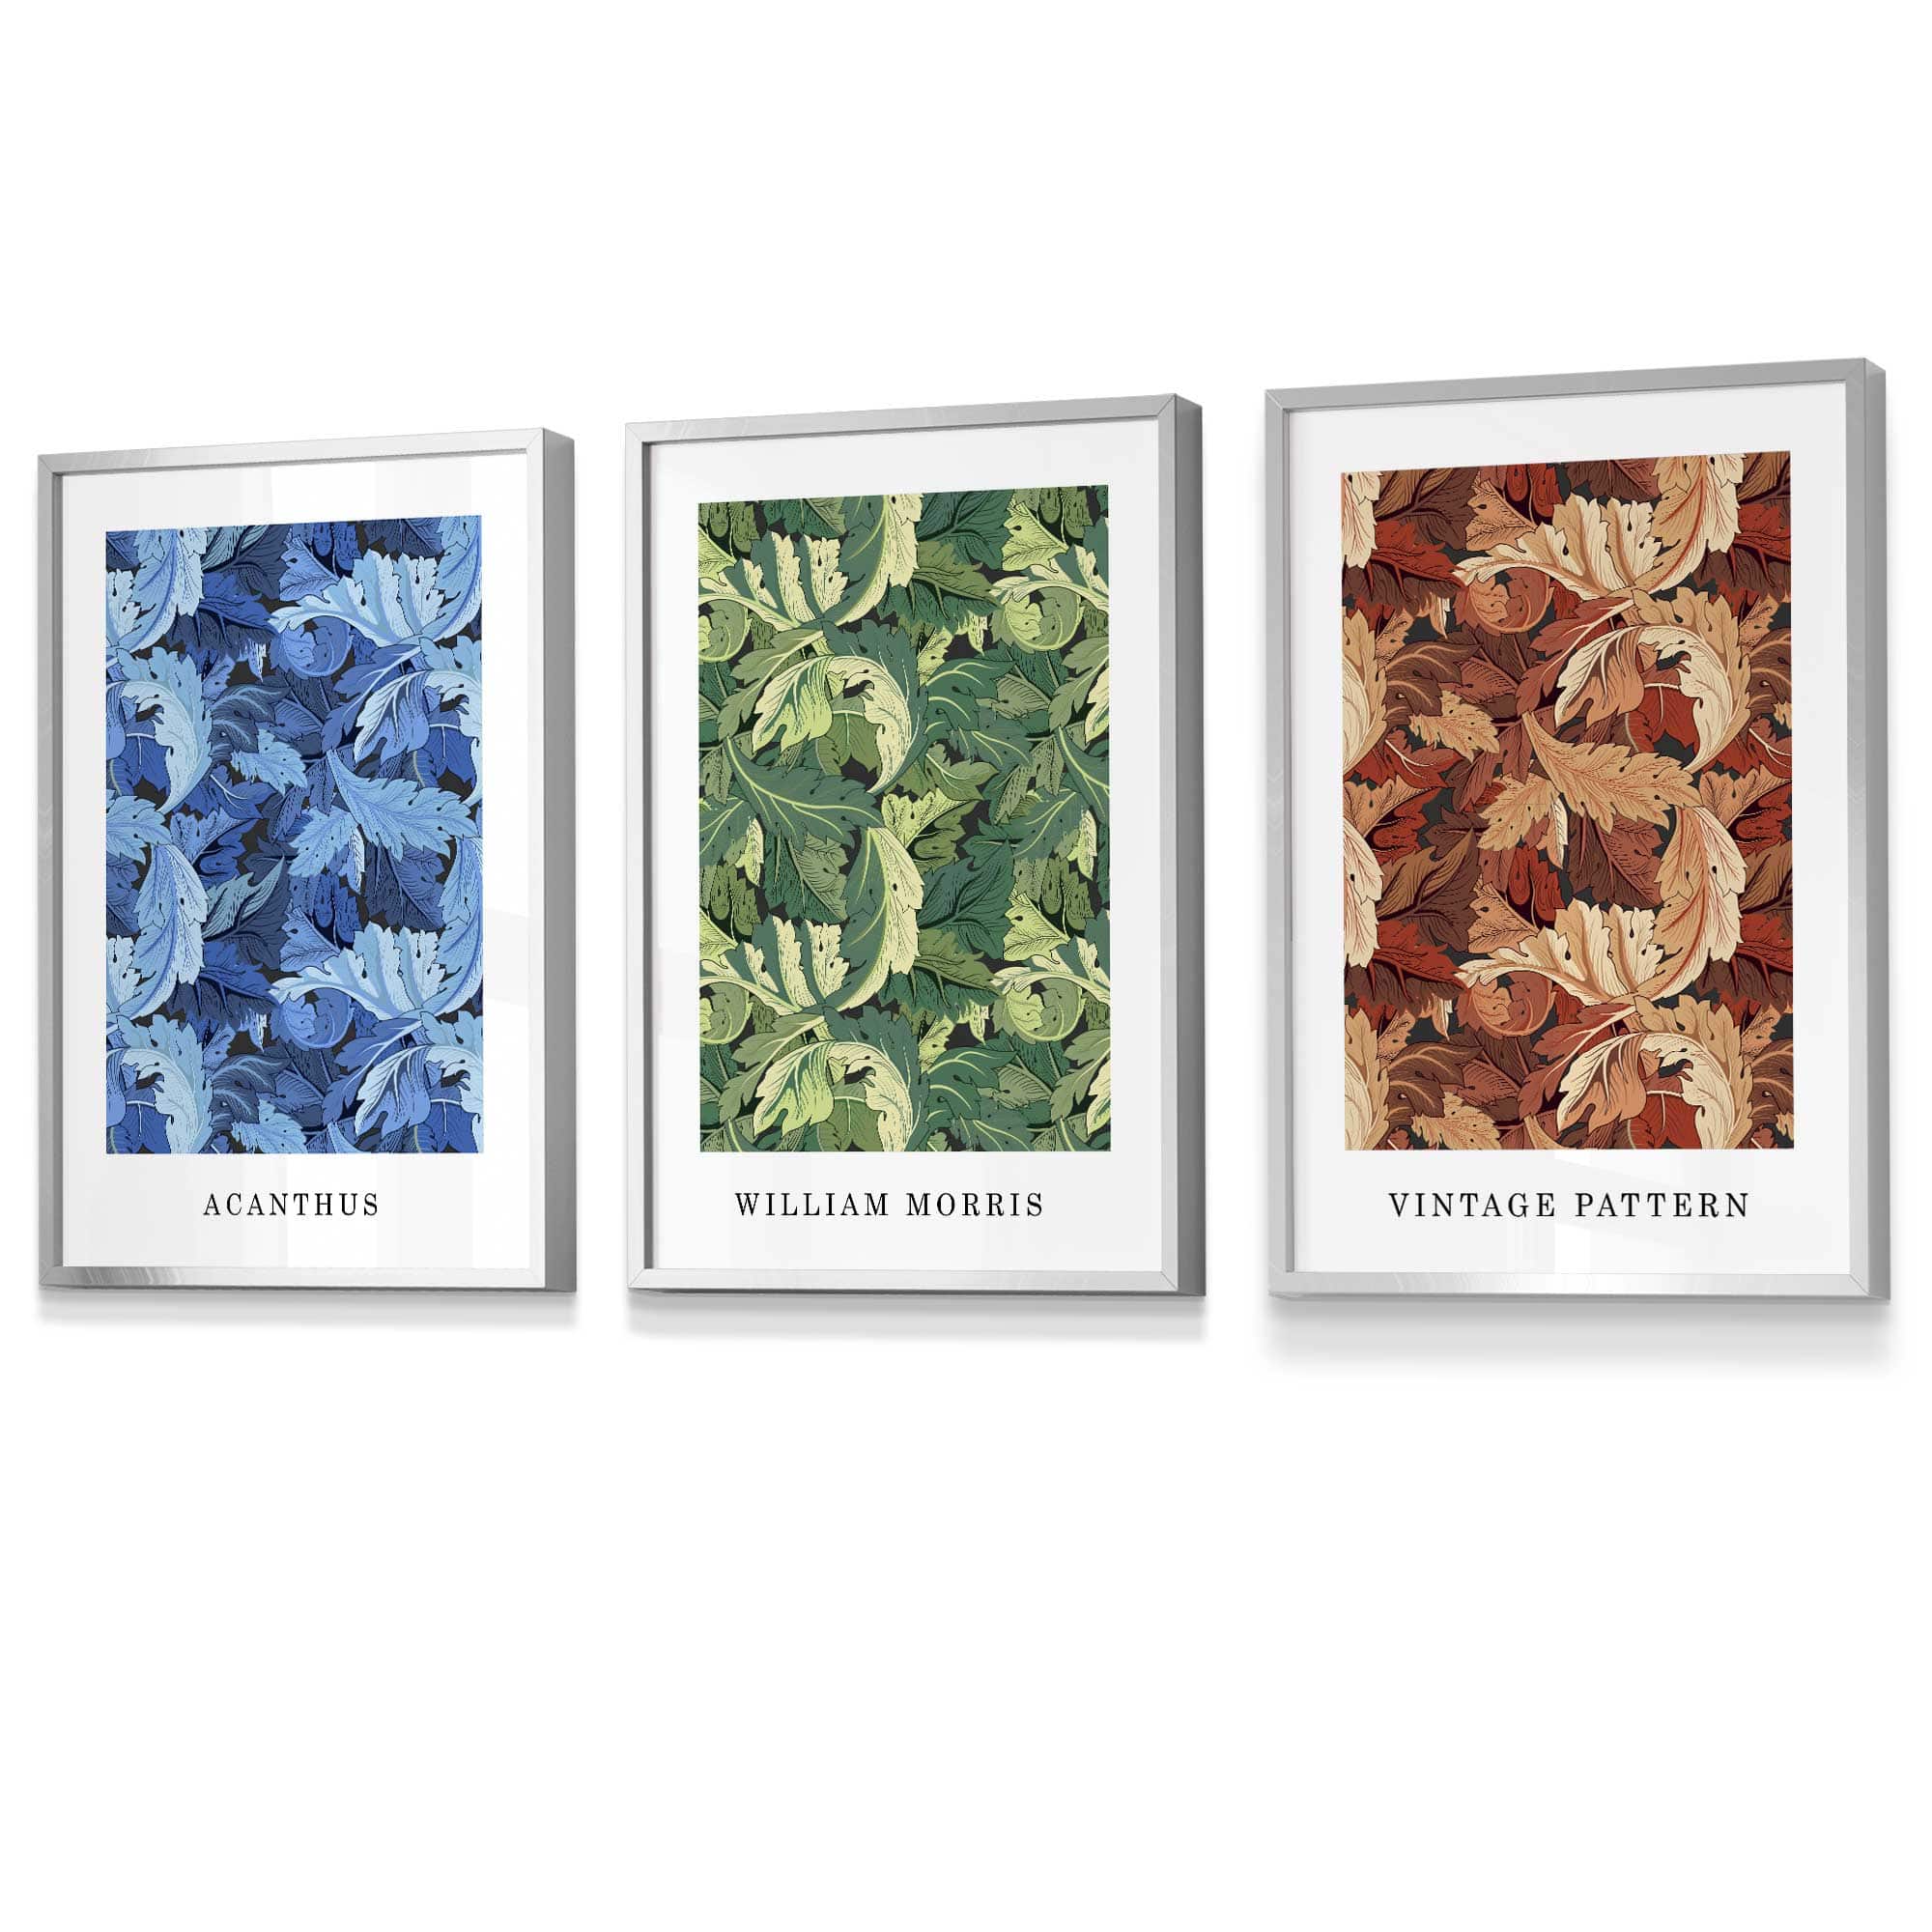 Framed William Morris Vintage Floral Wall Art in Blue Green and Tan | Artze Wall Art UK